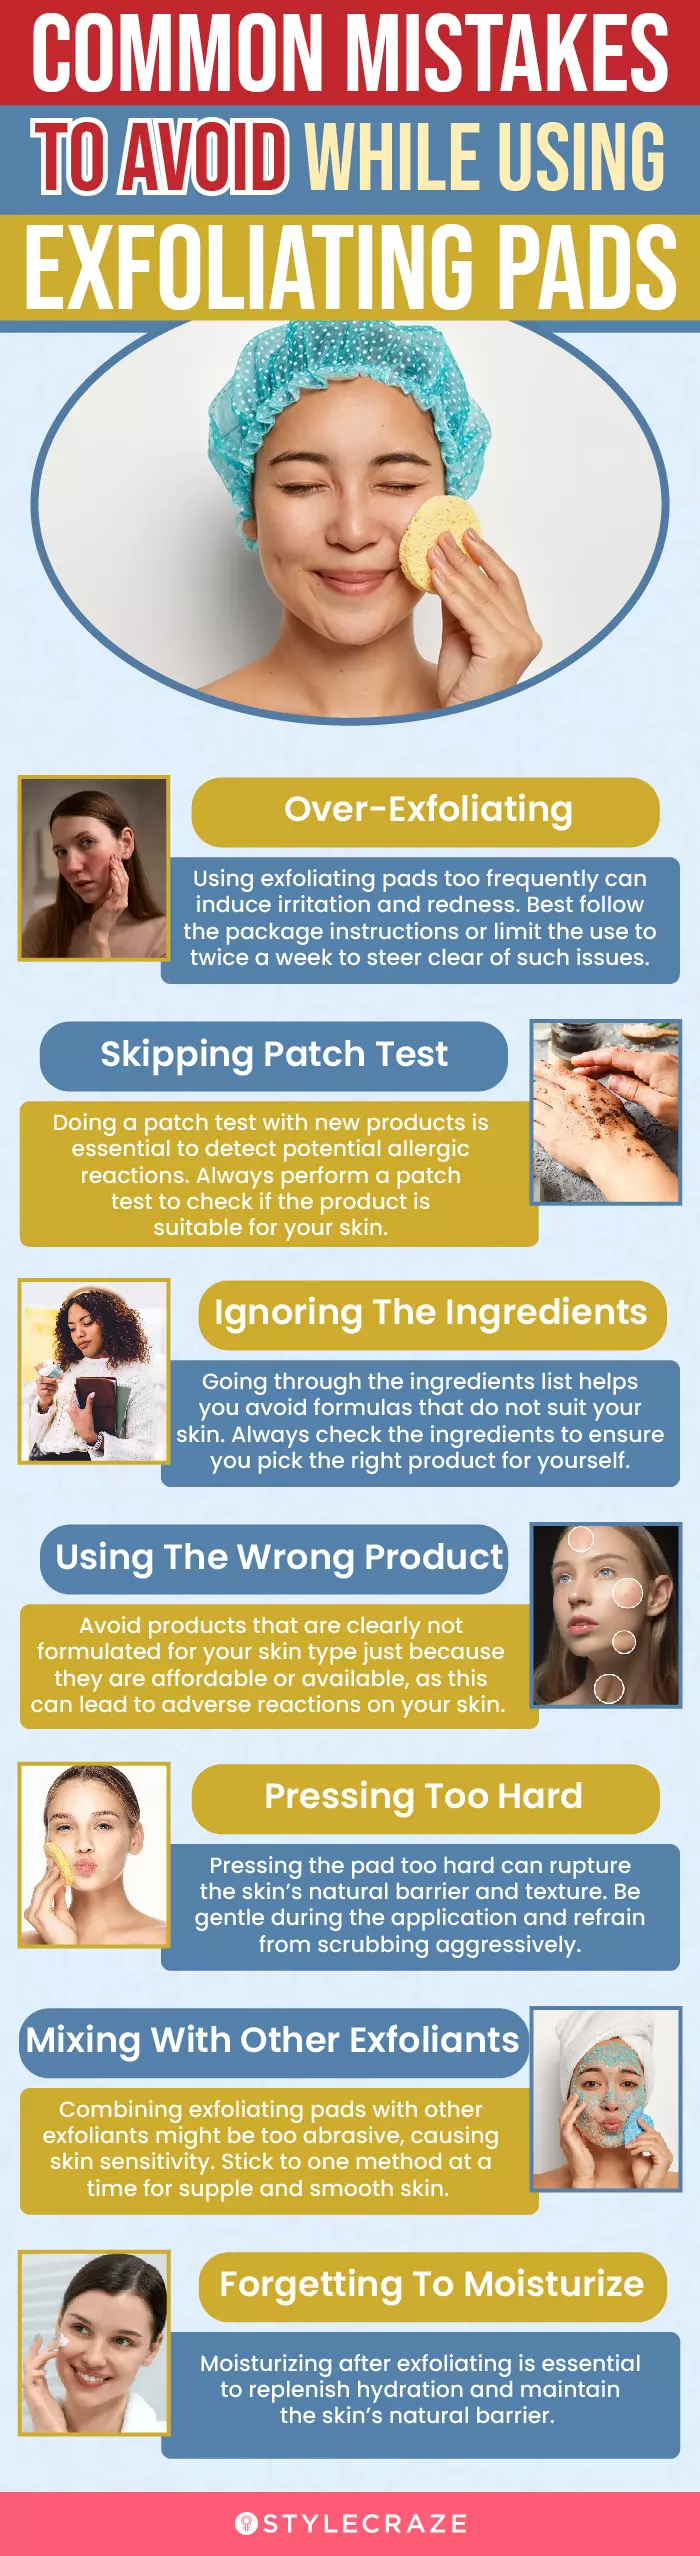 Common Mistakes To Avoid While Using Exfoliating Pads (infographic)